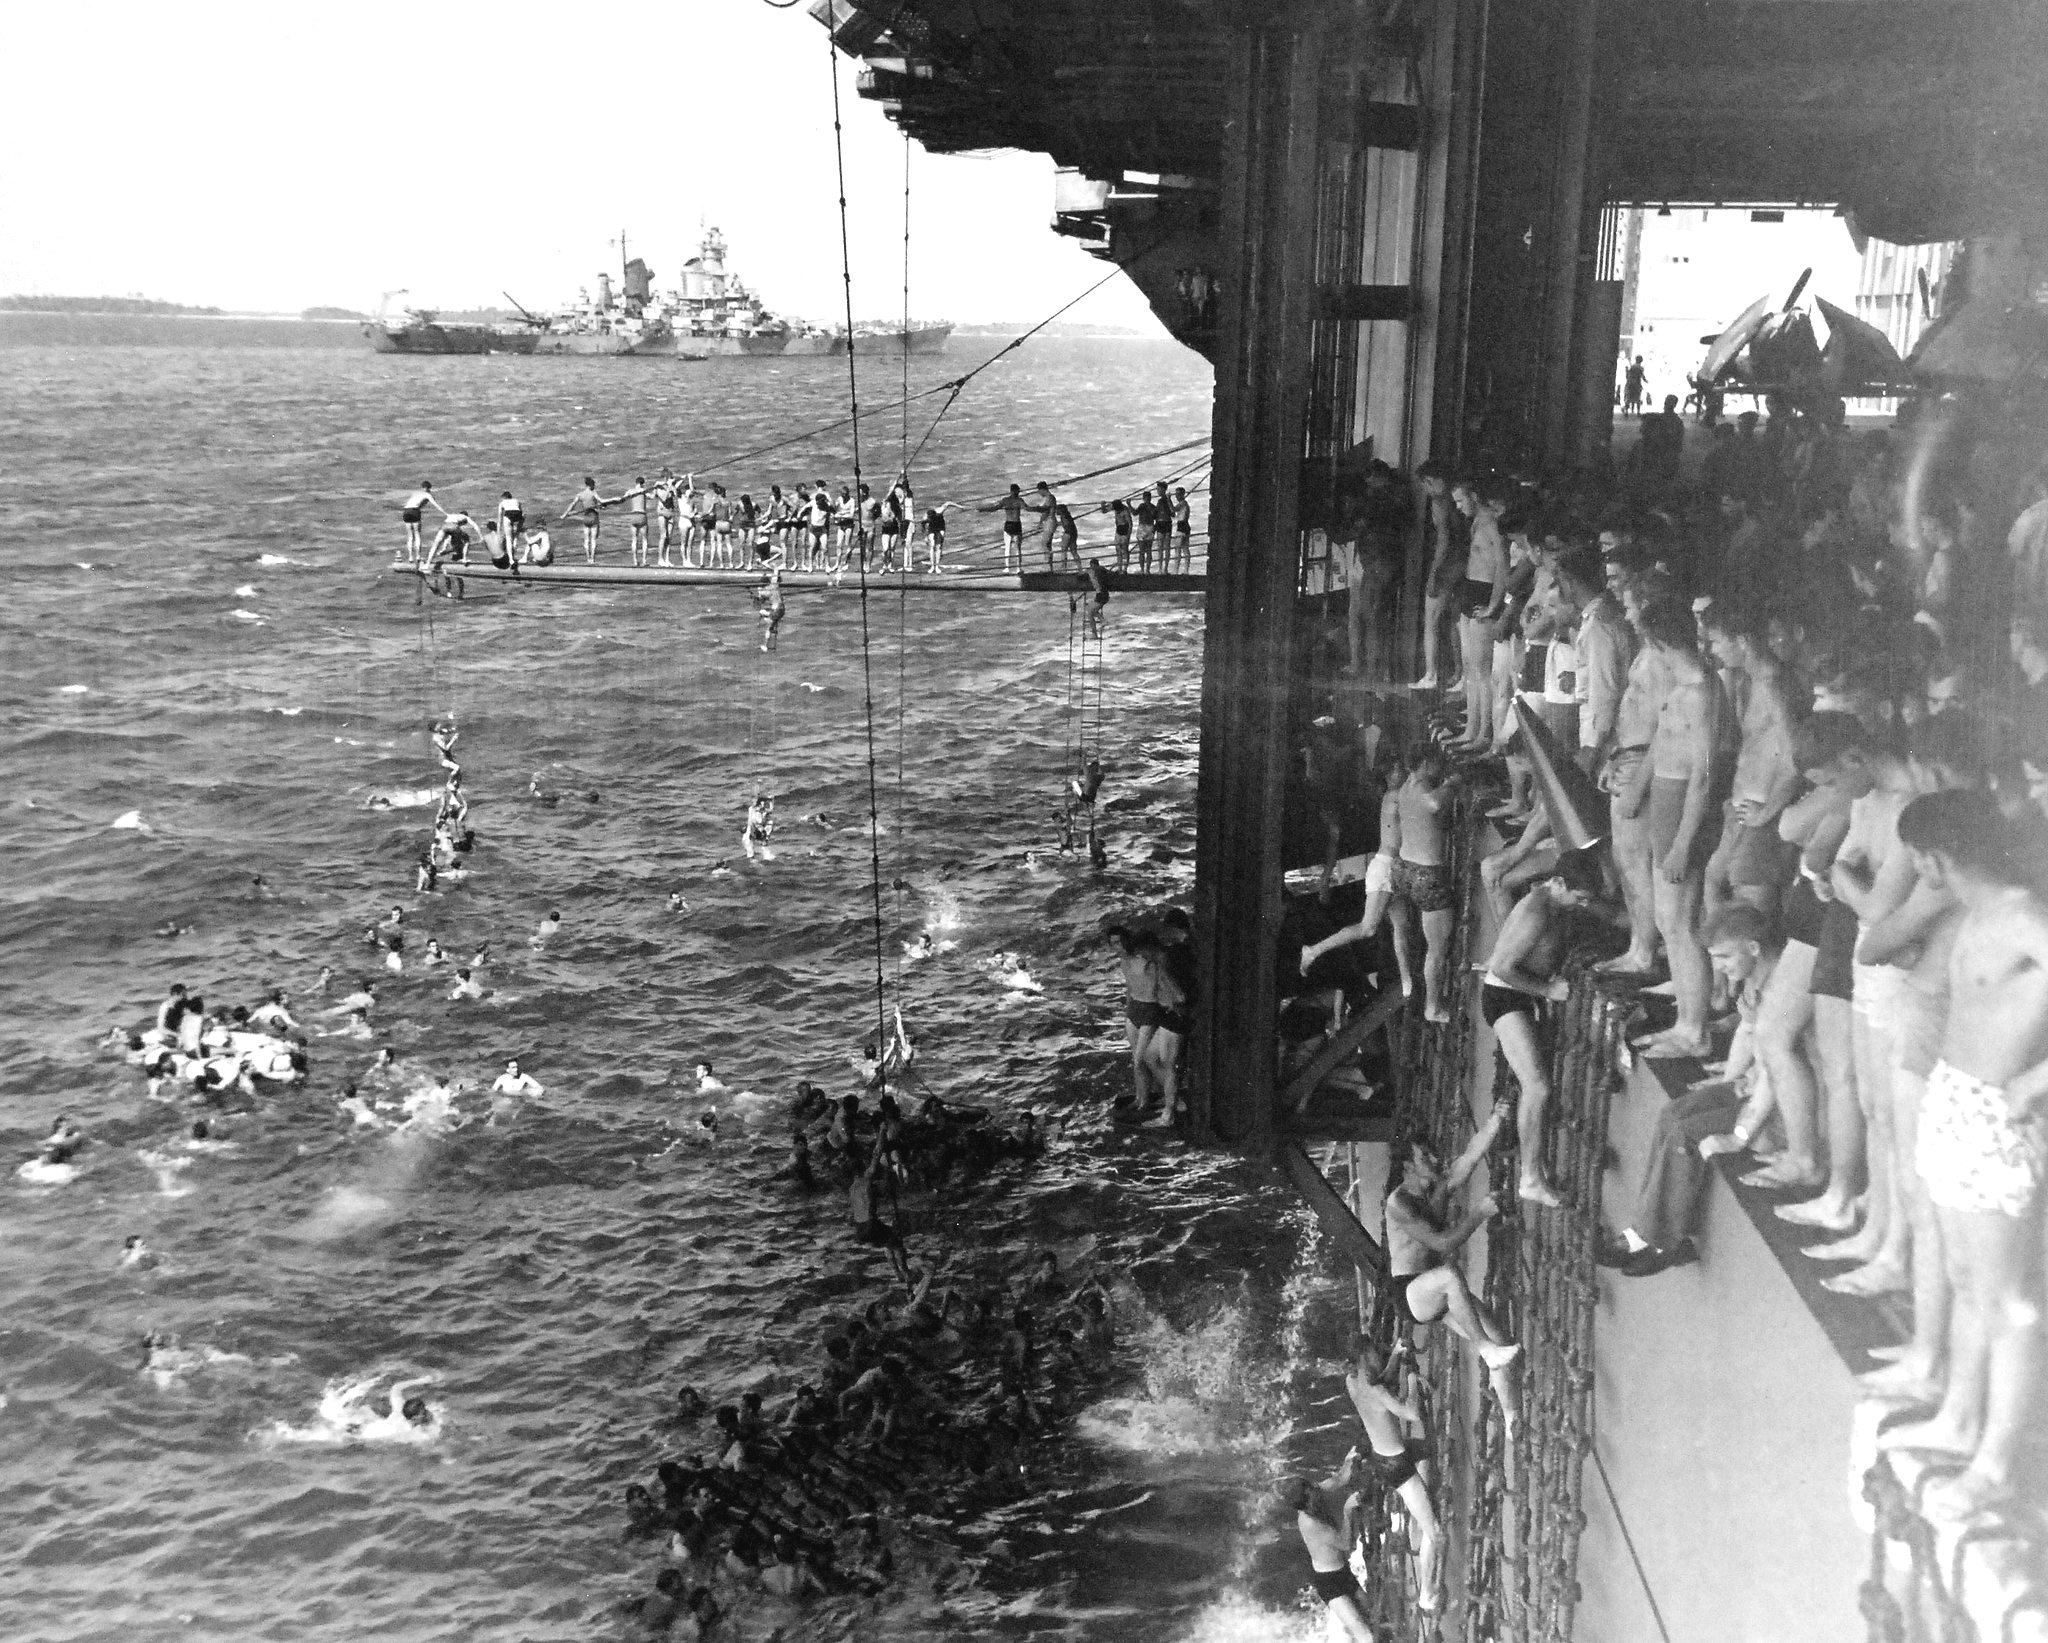 Members of the crew of the carrier USS Essex taking a swimming break in the Majuro Lagoon, Marshall Islands, Feb 1944. Note battleship USS Iowa in the background.